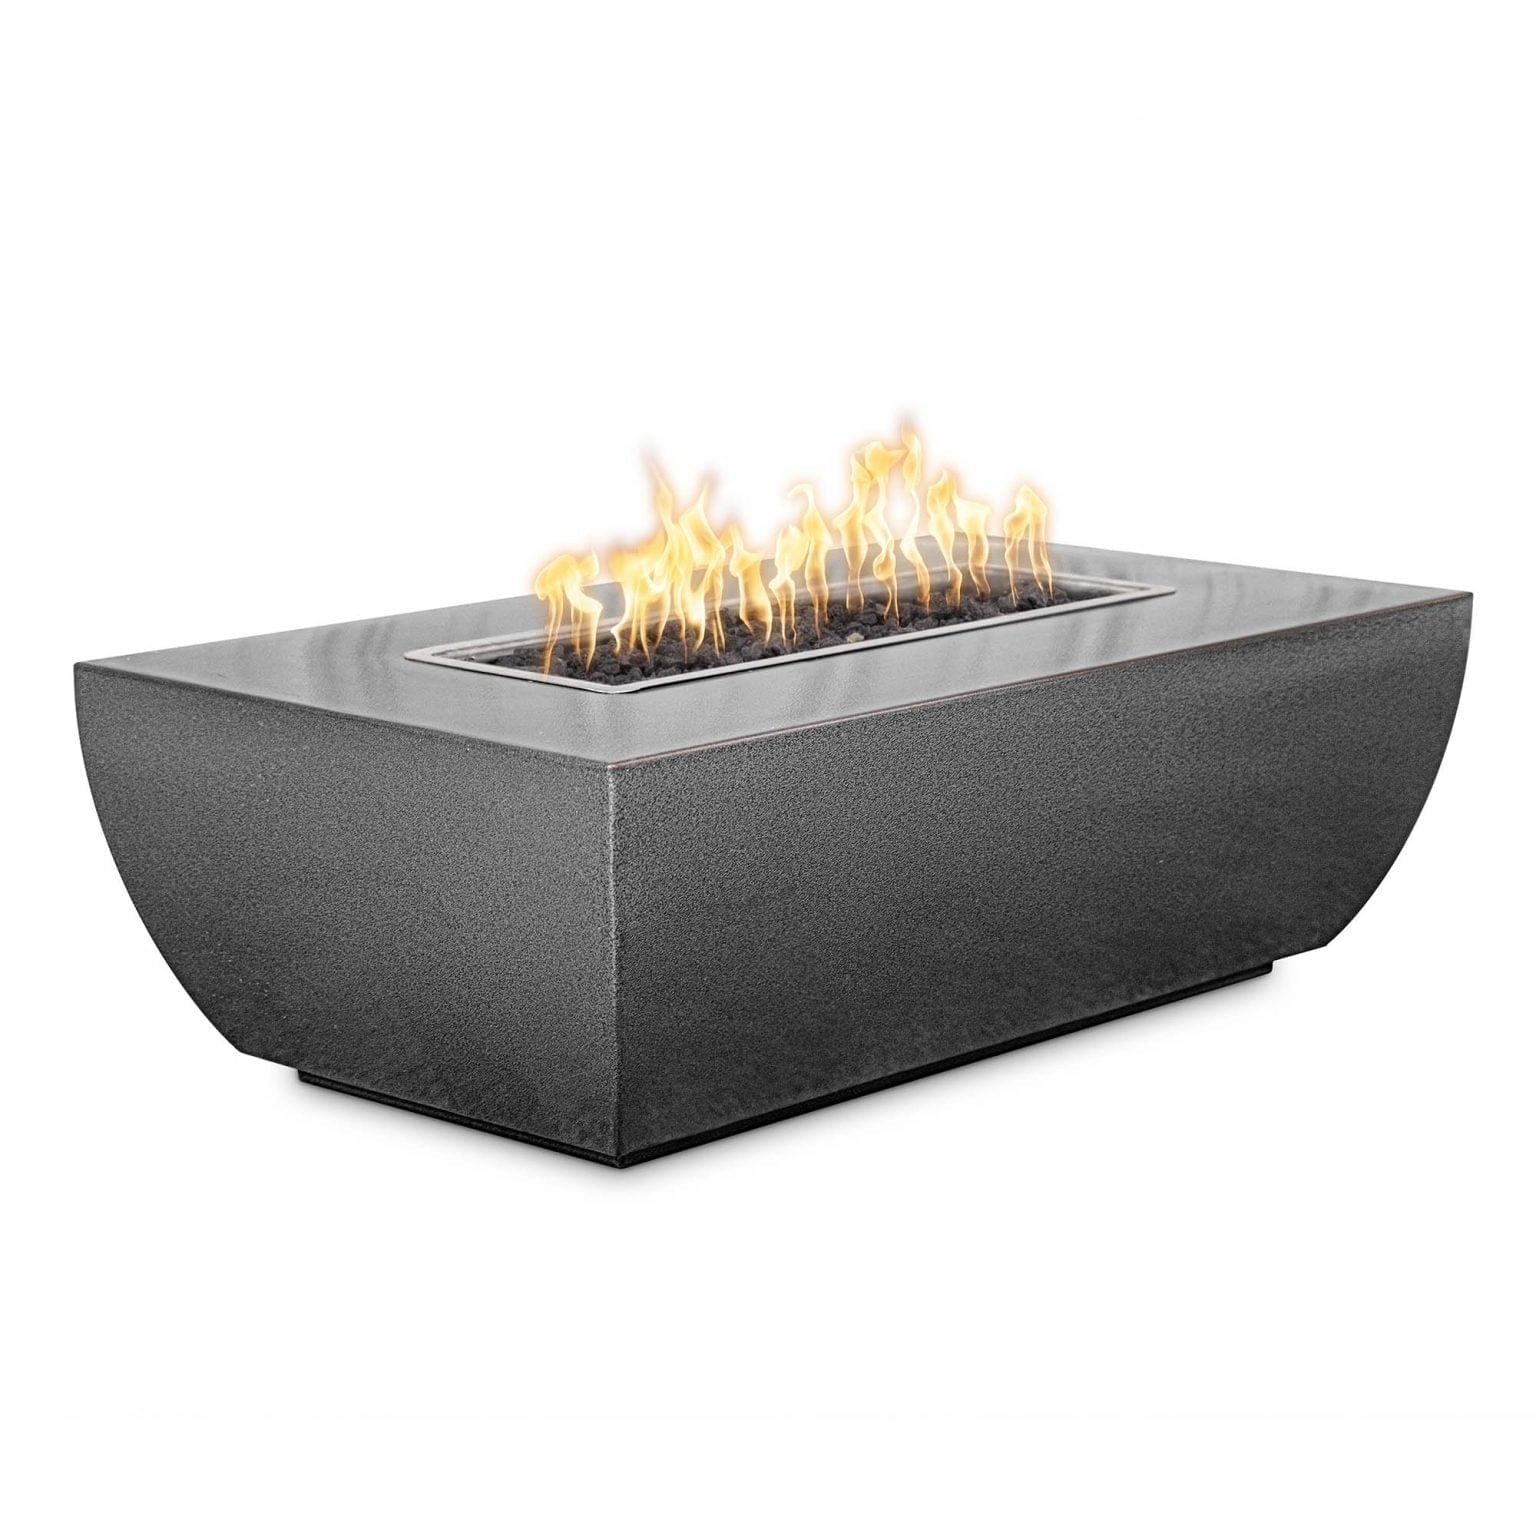 The Outdoor Plus Fire Pit 48" x 28" / Match Lit The Outdoor Plus Avalon 15" Tall Linear Fire Pit | Metal Powder Coat OPT-AVLPC4815